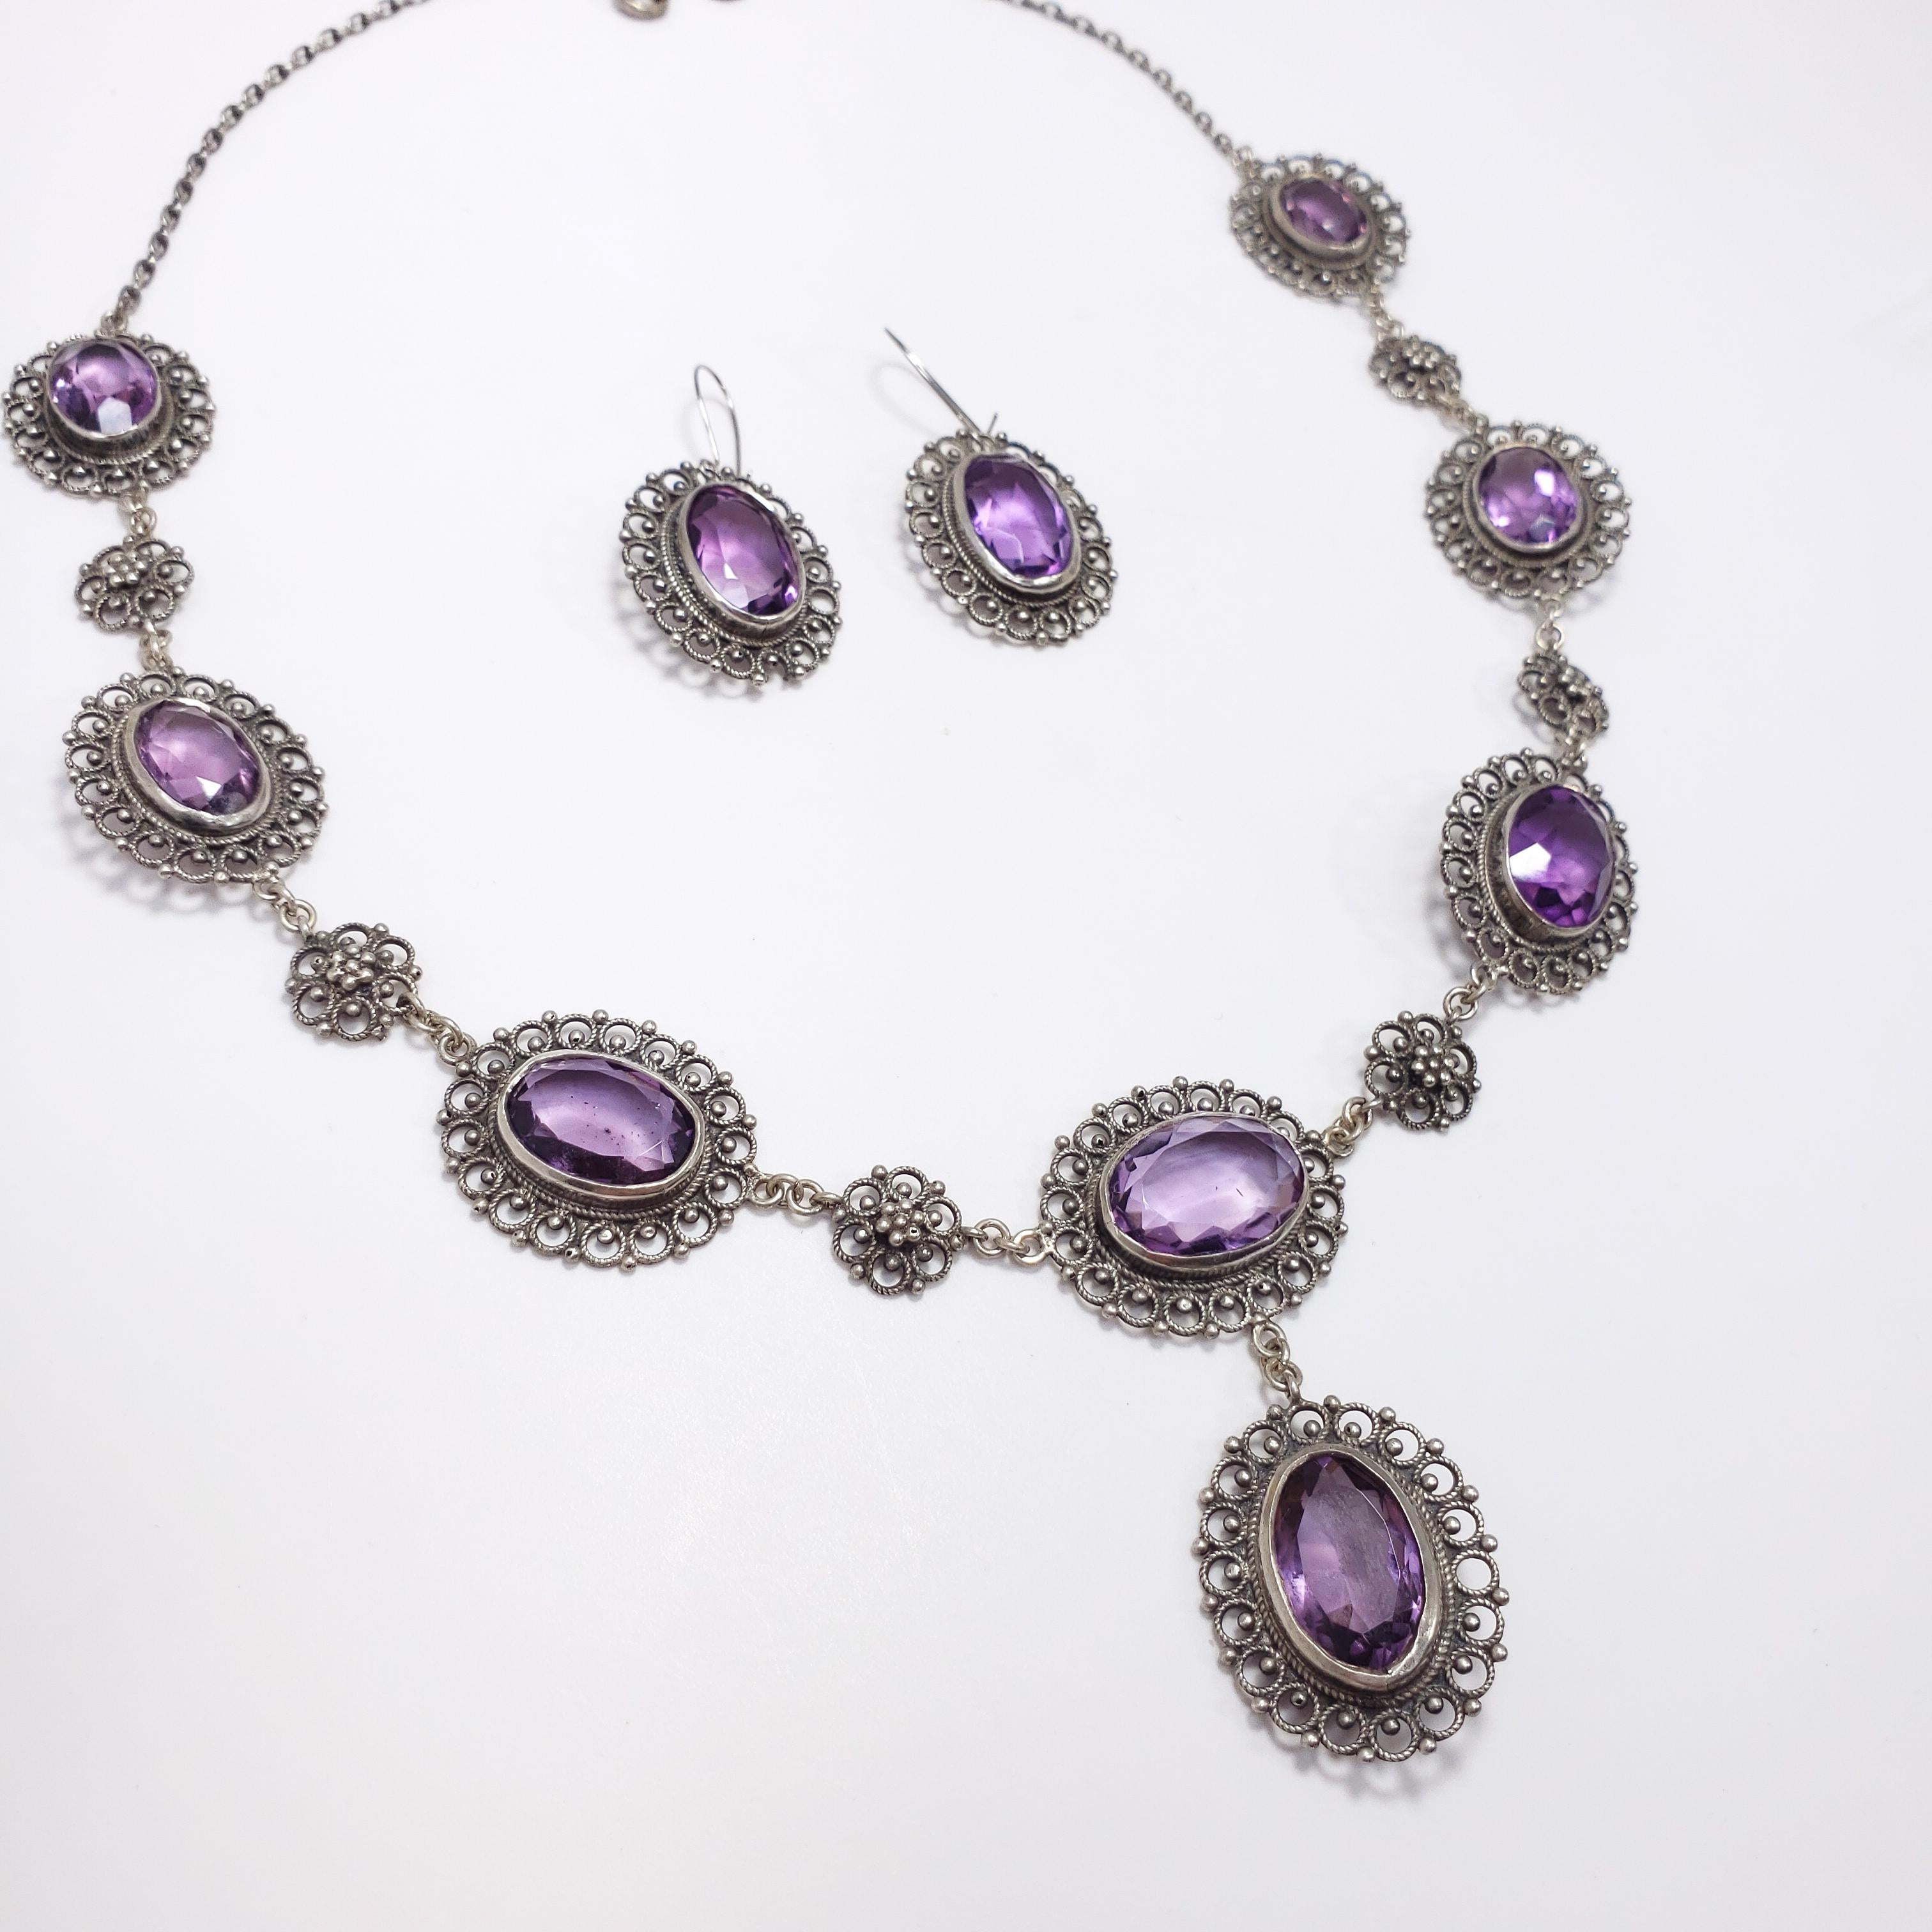 An absolutely regal demi-parure from the Victorian era, circa late 1800s. Features a drop necklace and pair of earrings in hallmarked 800 silver, with 8 graduated genuine amethysts in the necklace and a single amethyst in each earring, all in open